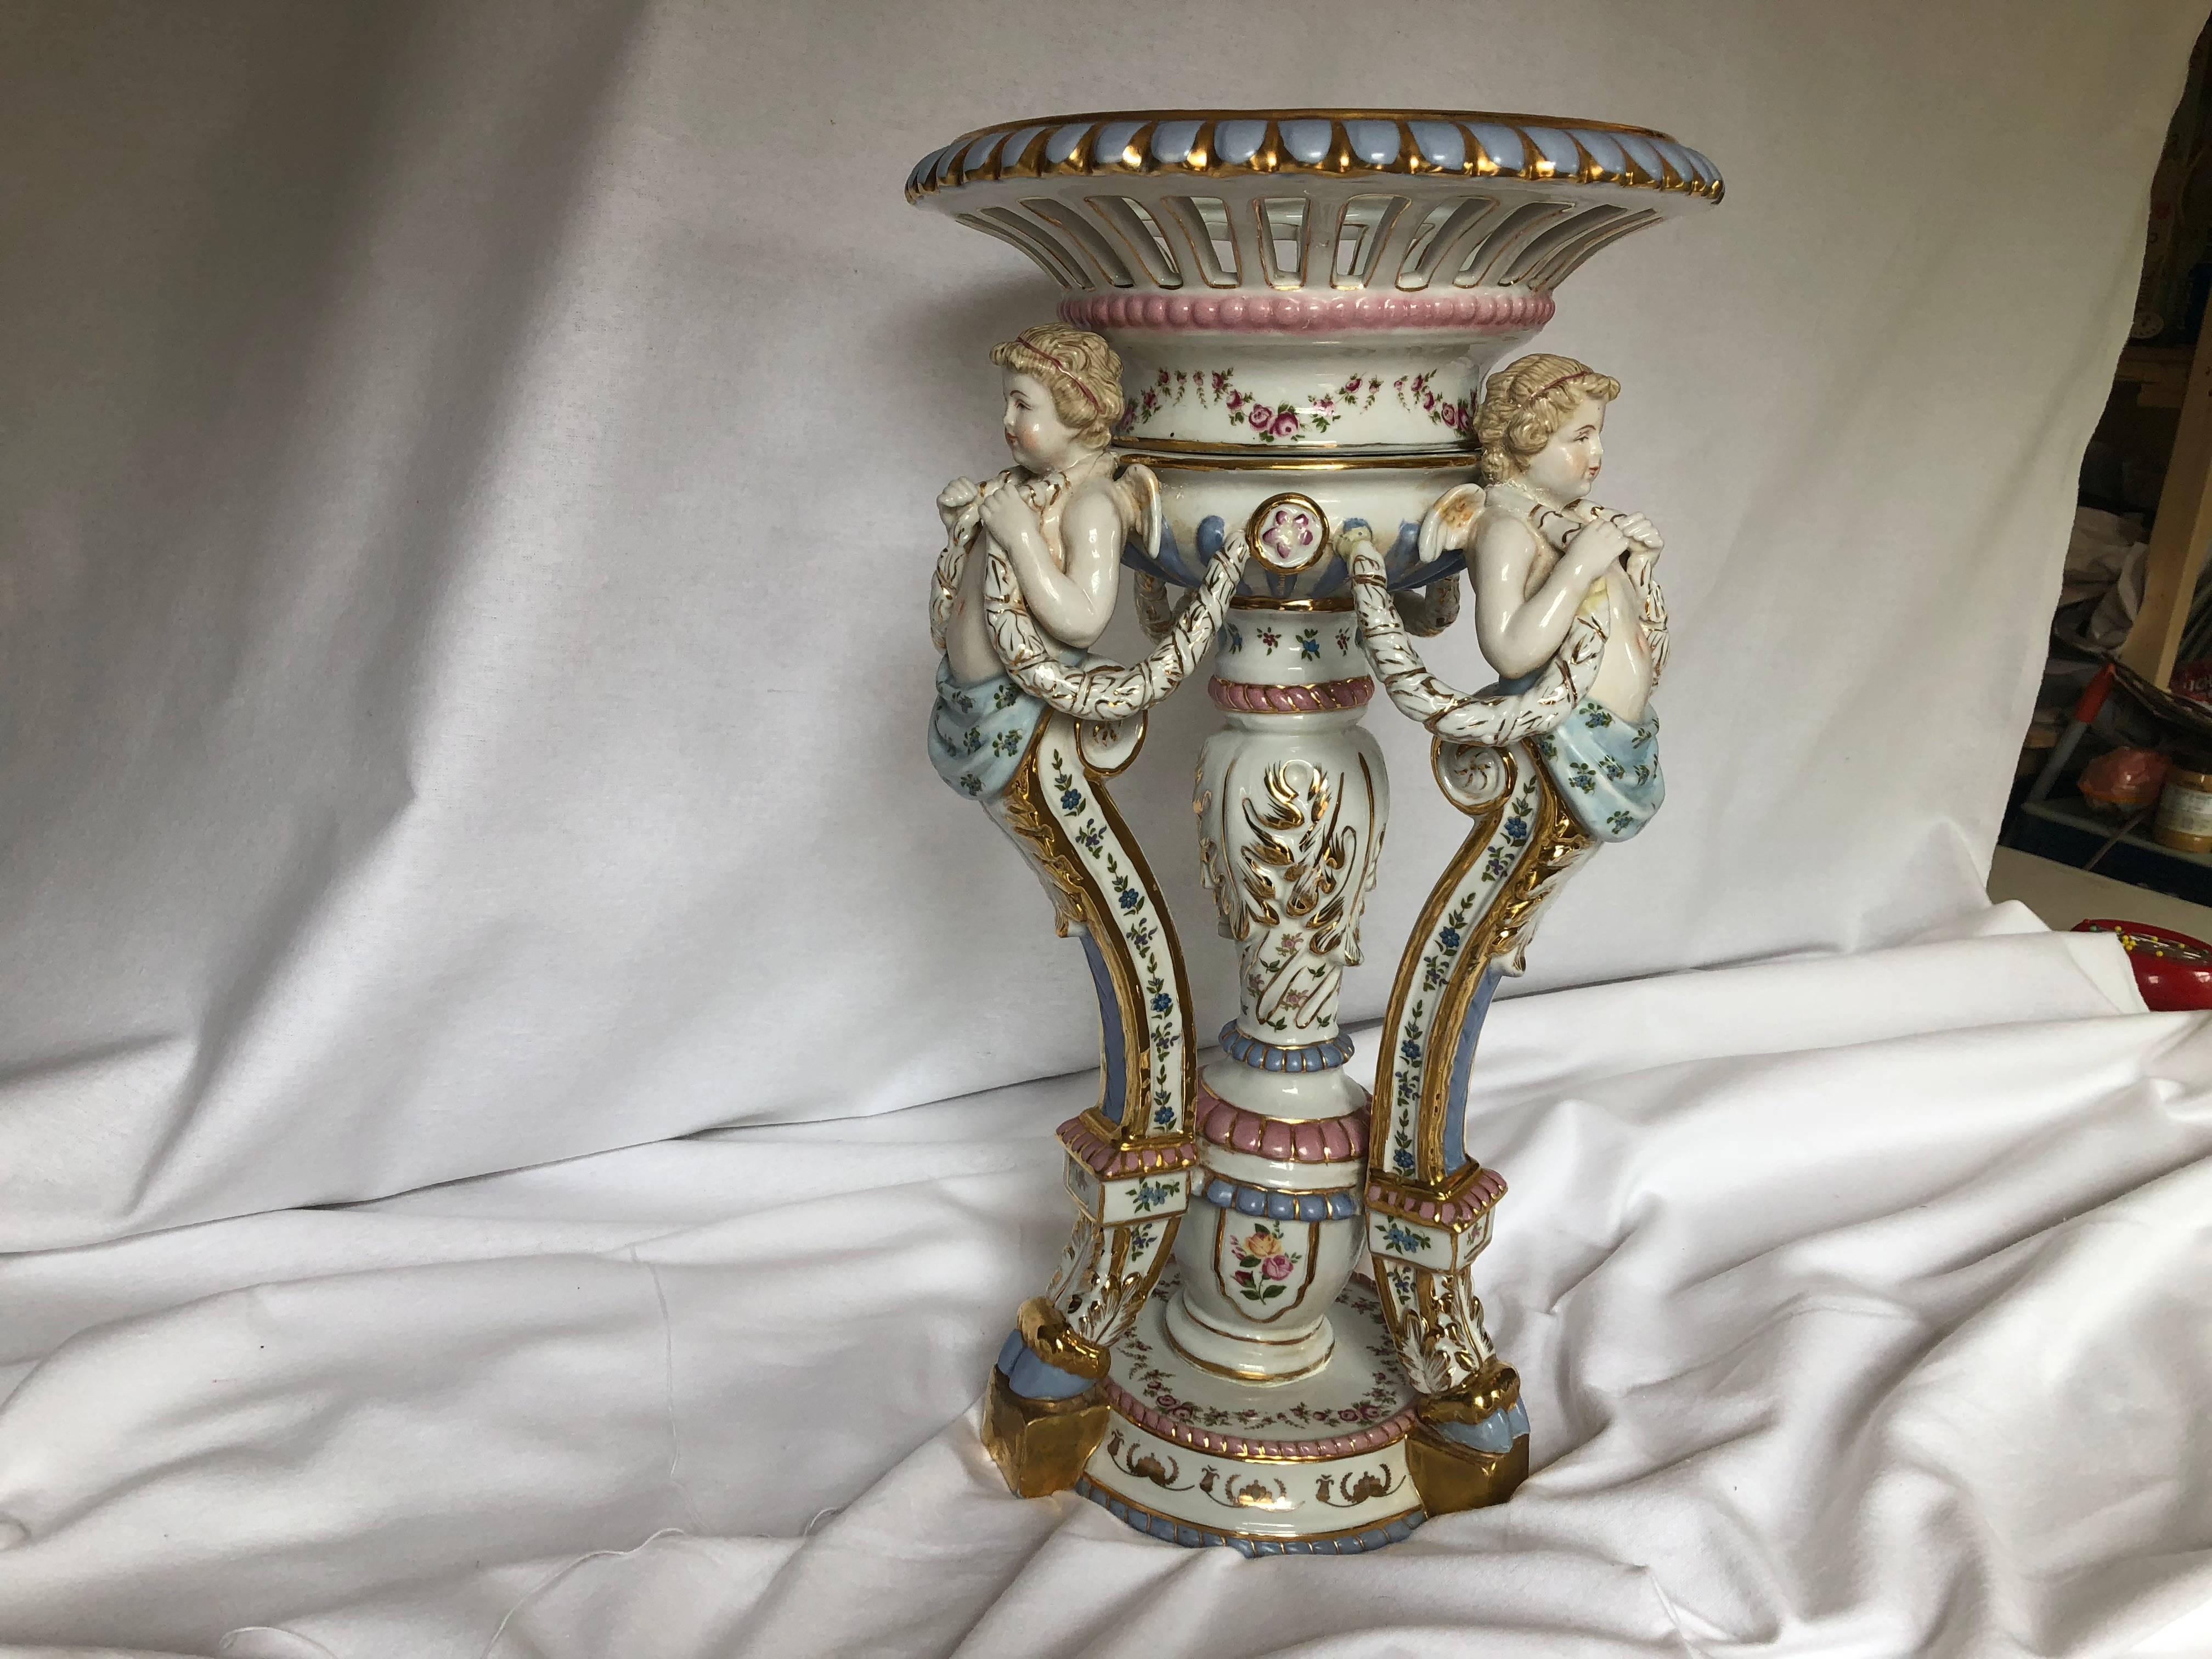 Absolutely exquisite large hand-painted porcelain centrepiece. This beautiful Baroque style centrepiece will create an impressive elegant atmosphere on any tabletop. Most likely made in the 1920s it shows some barely noticeable repairs and signs